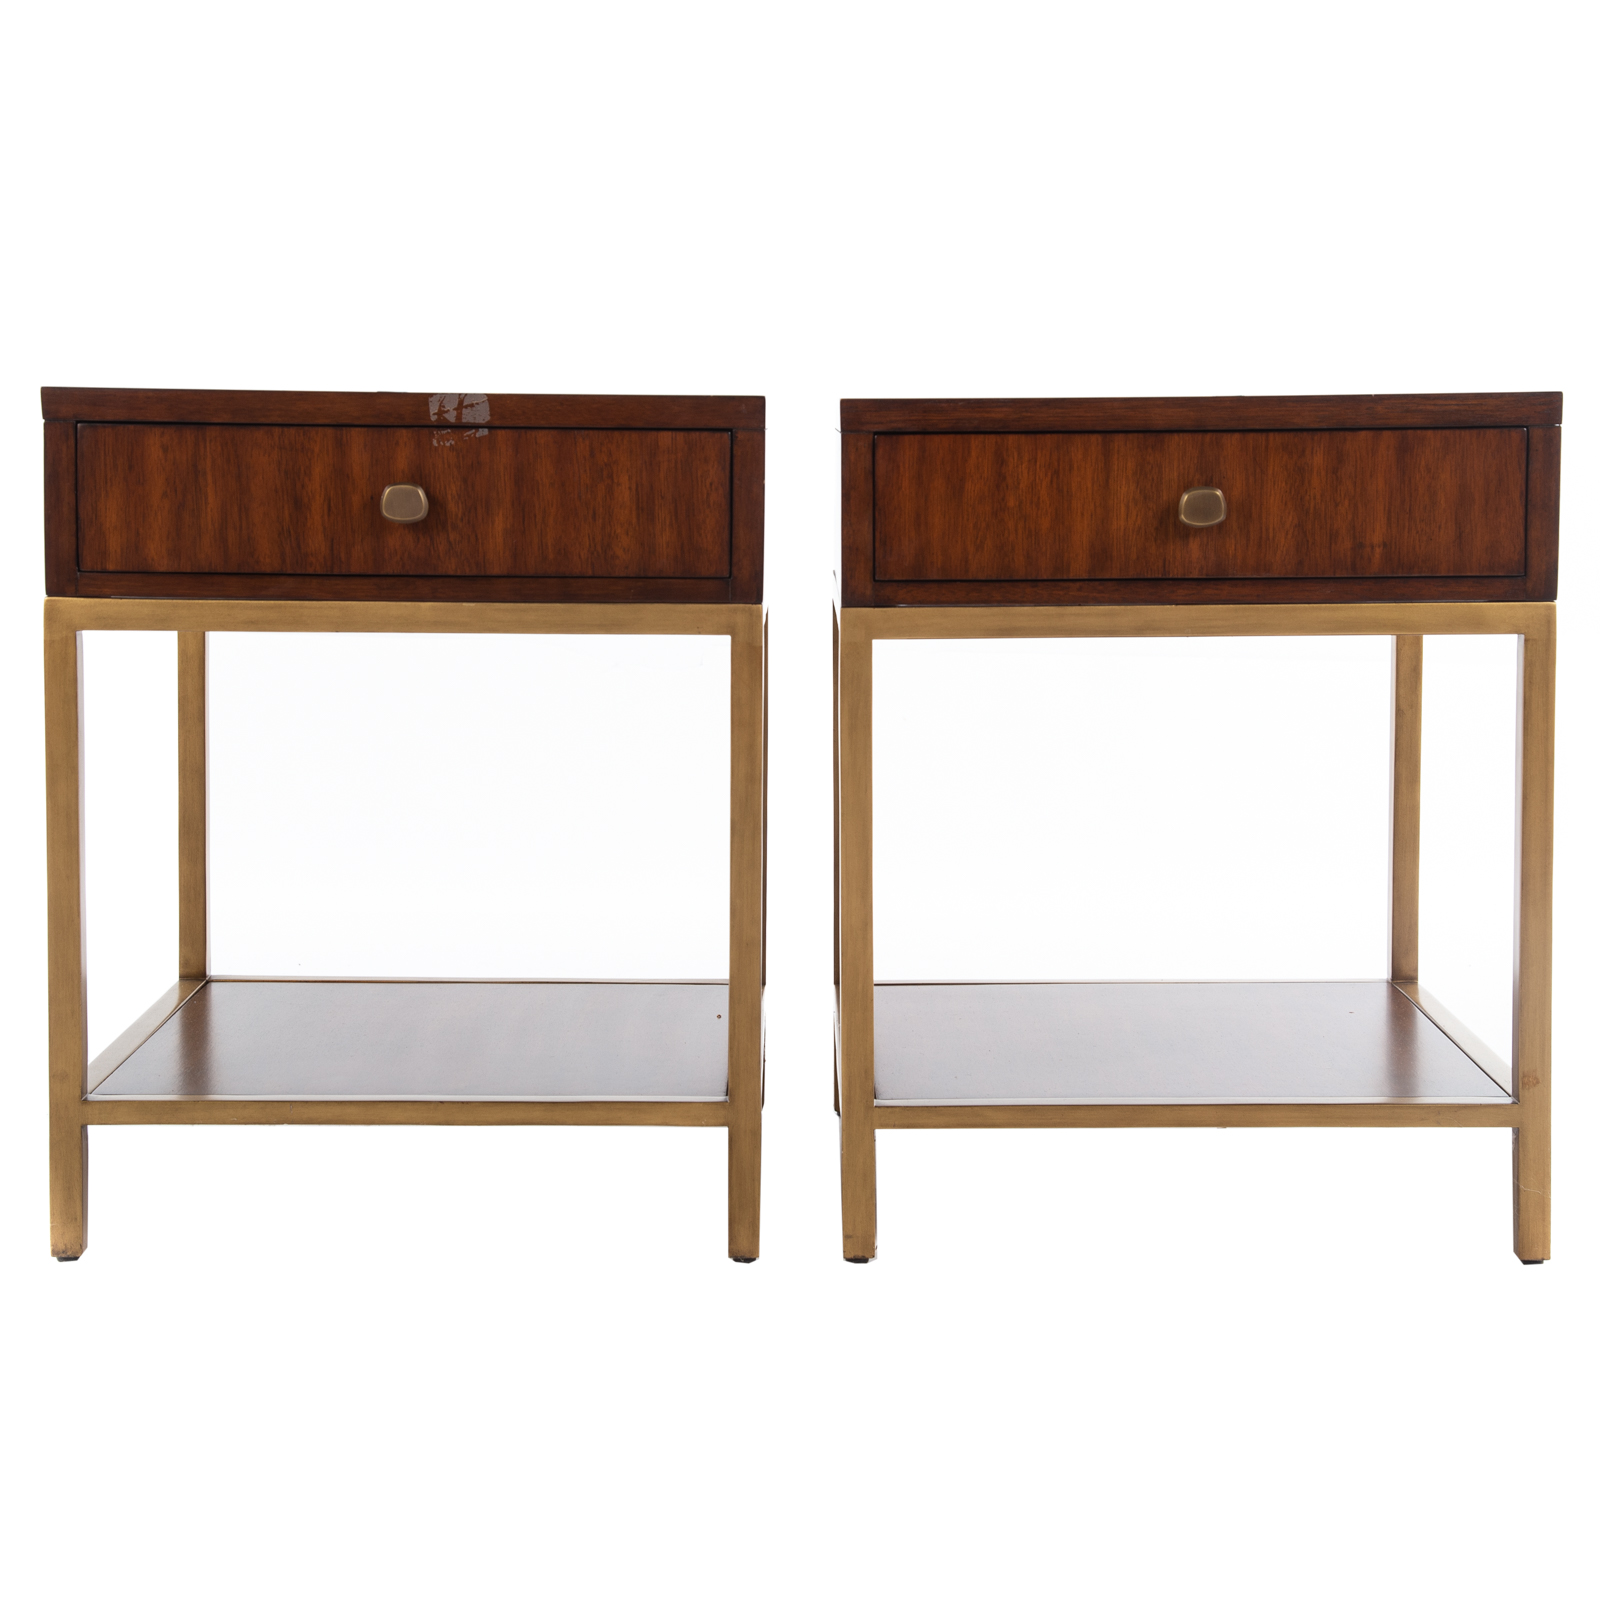 A PAIR OF M G GOMEZ SIDE TABLES  3cb5f8